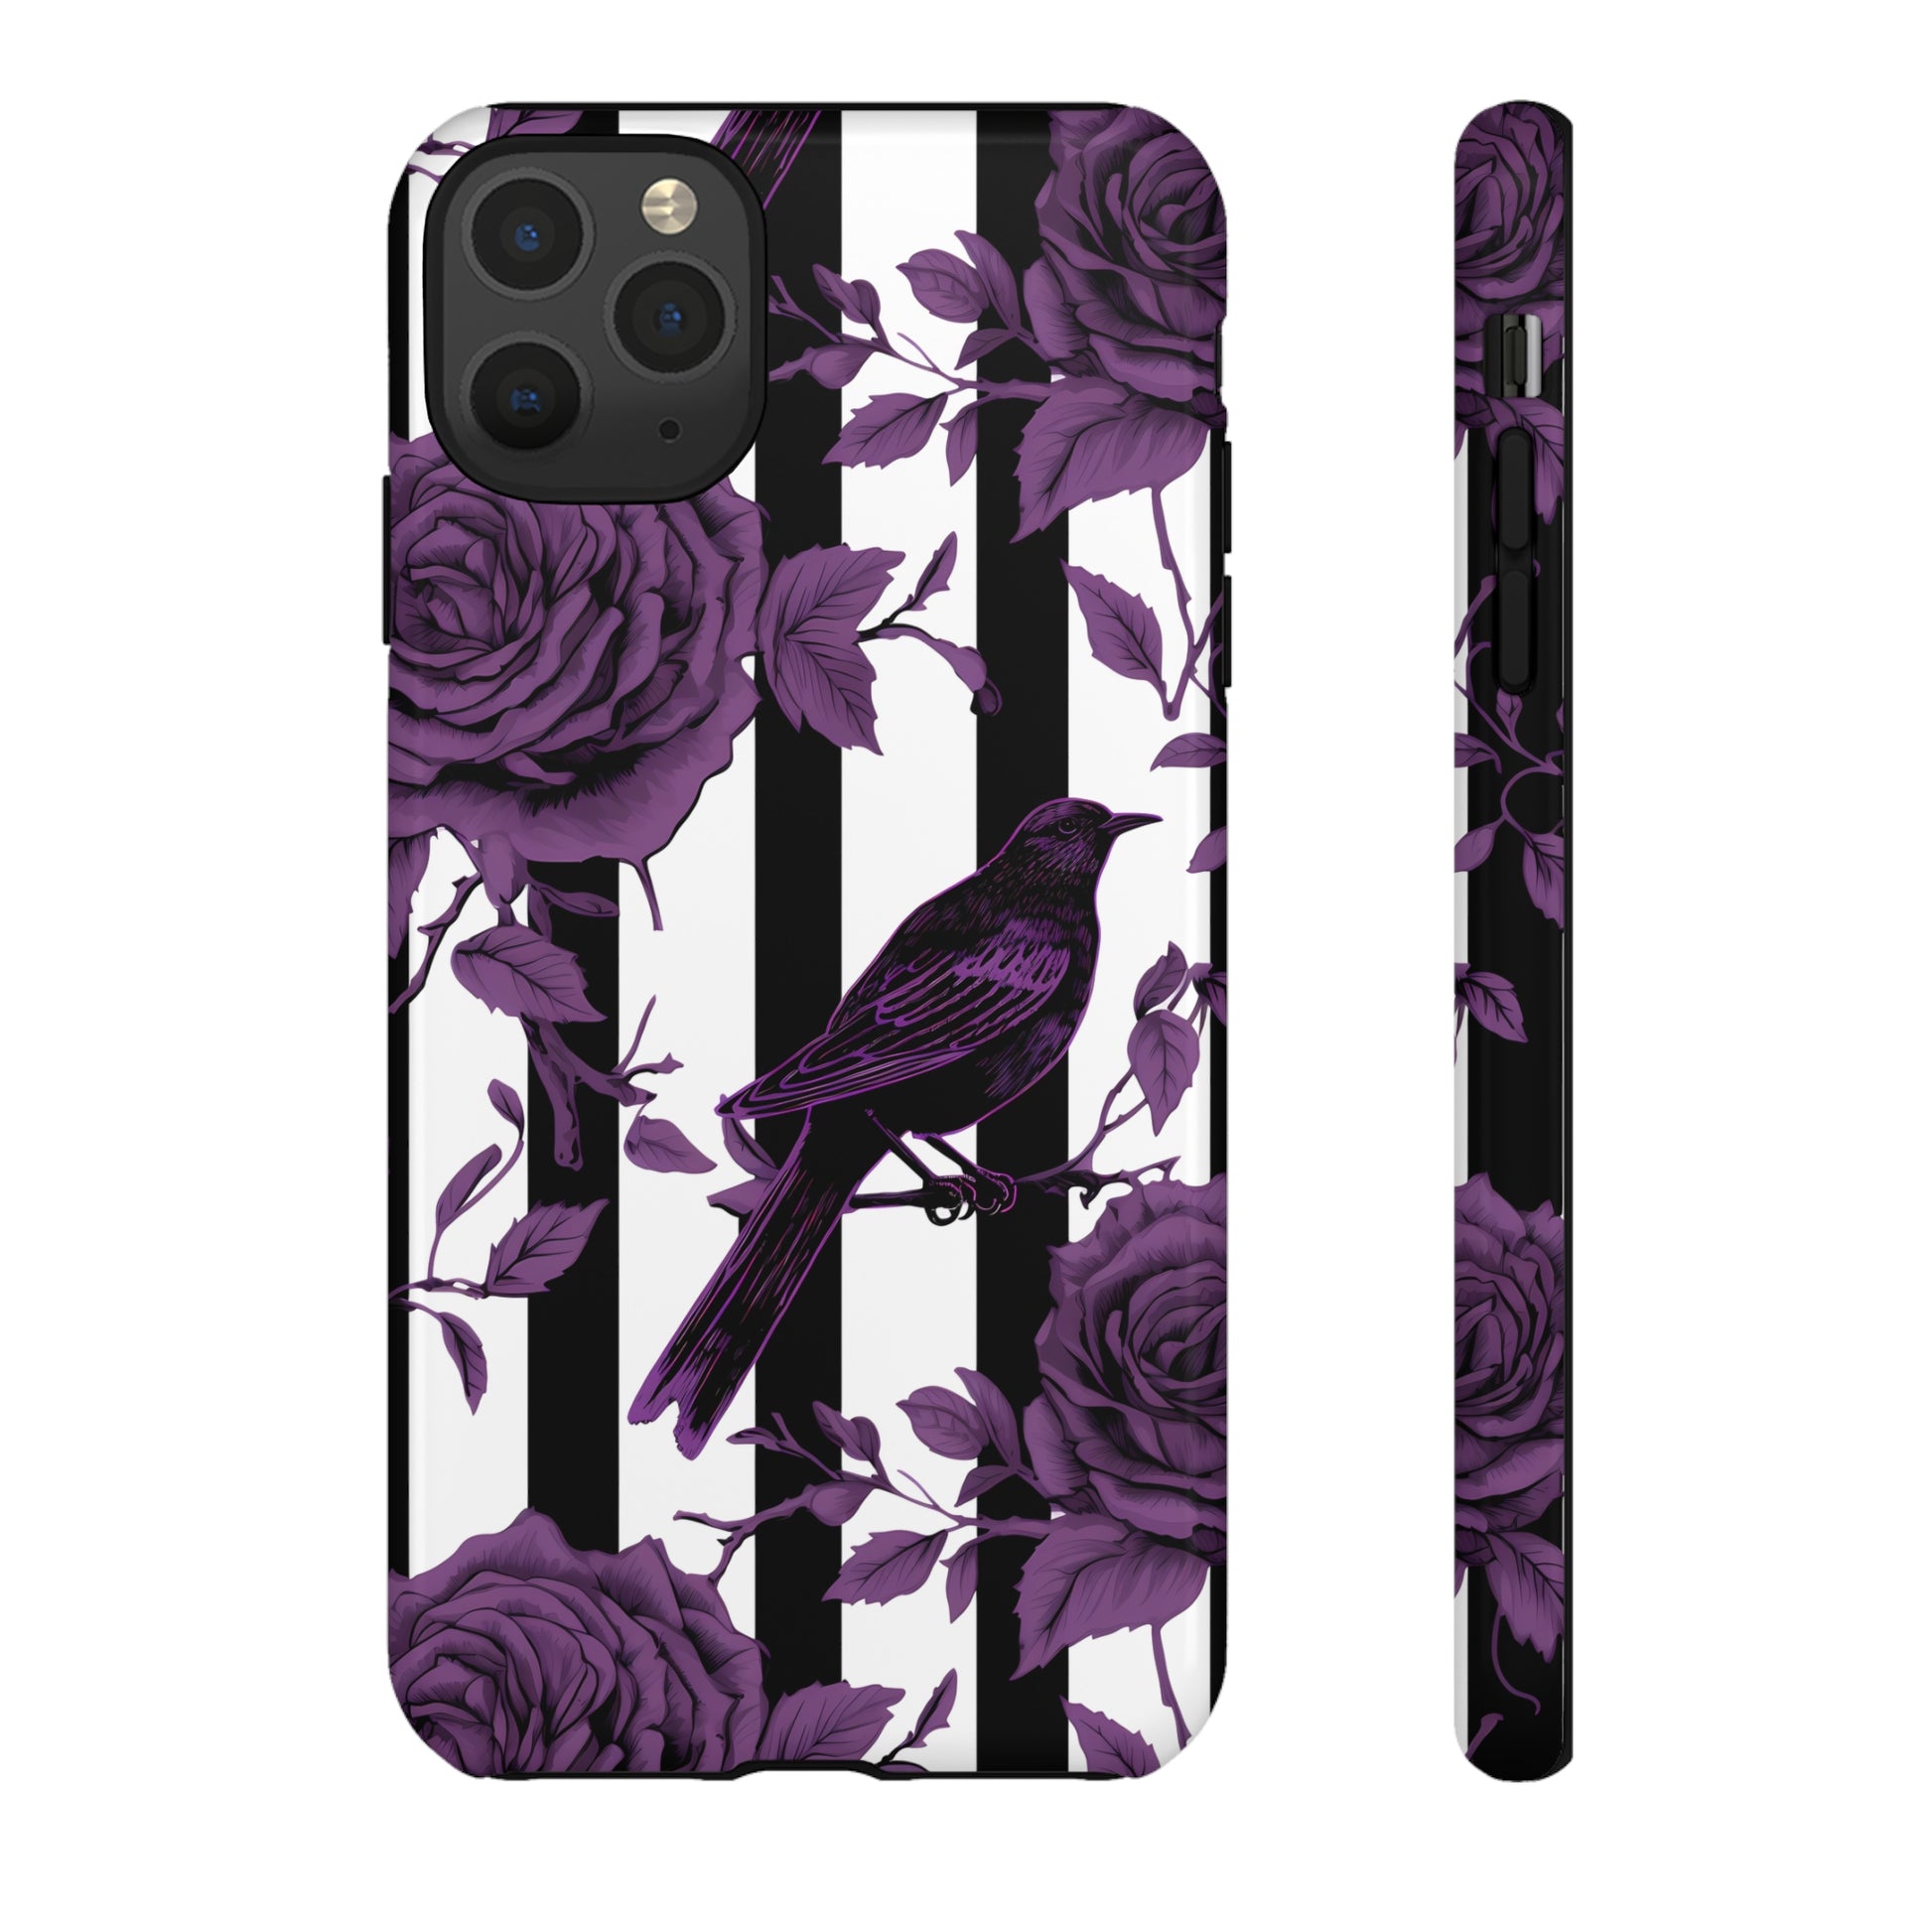 Striped Crows and Roses Tough Cases for iPhone Samsung Google PhonesPhone CaseVTZdesignsiPhone 11 Pro MaxGlossyAccessoriescrowsGlossy